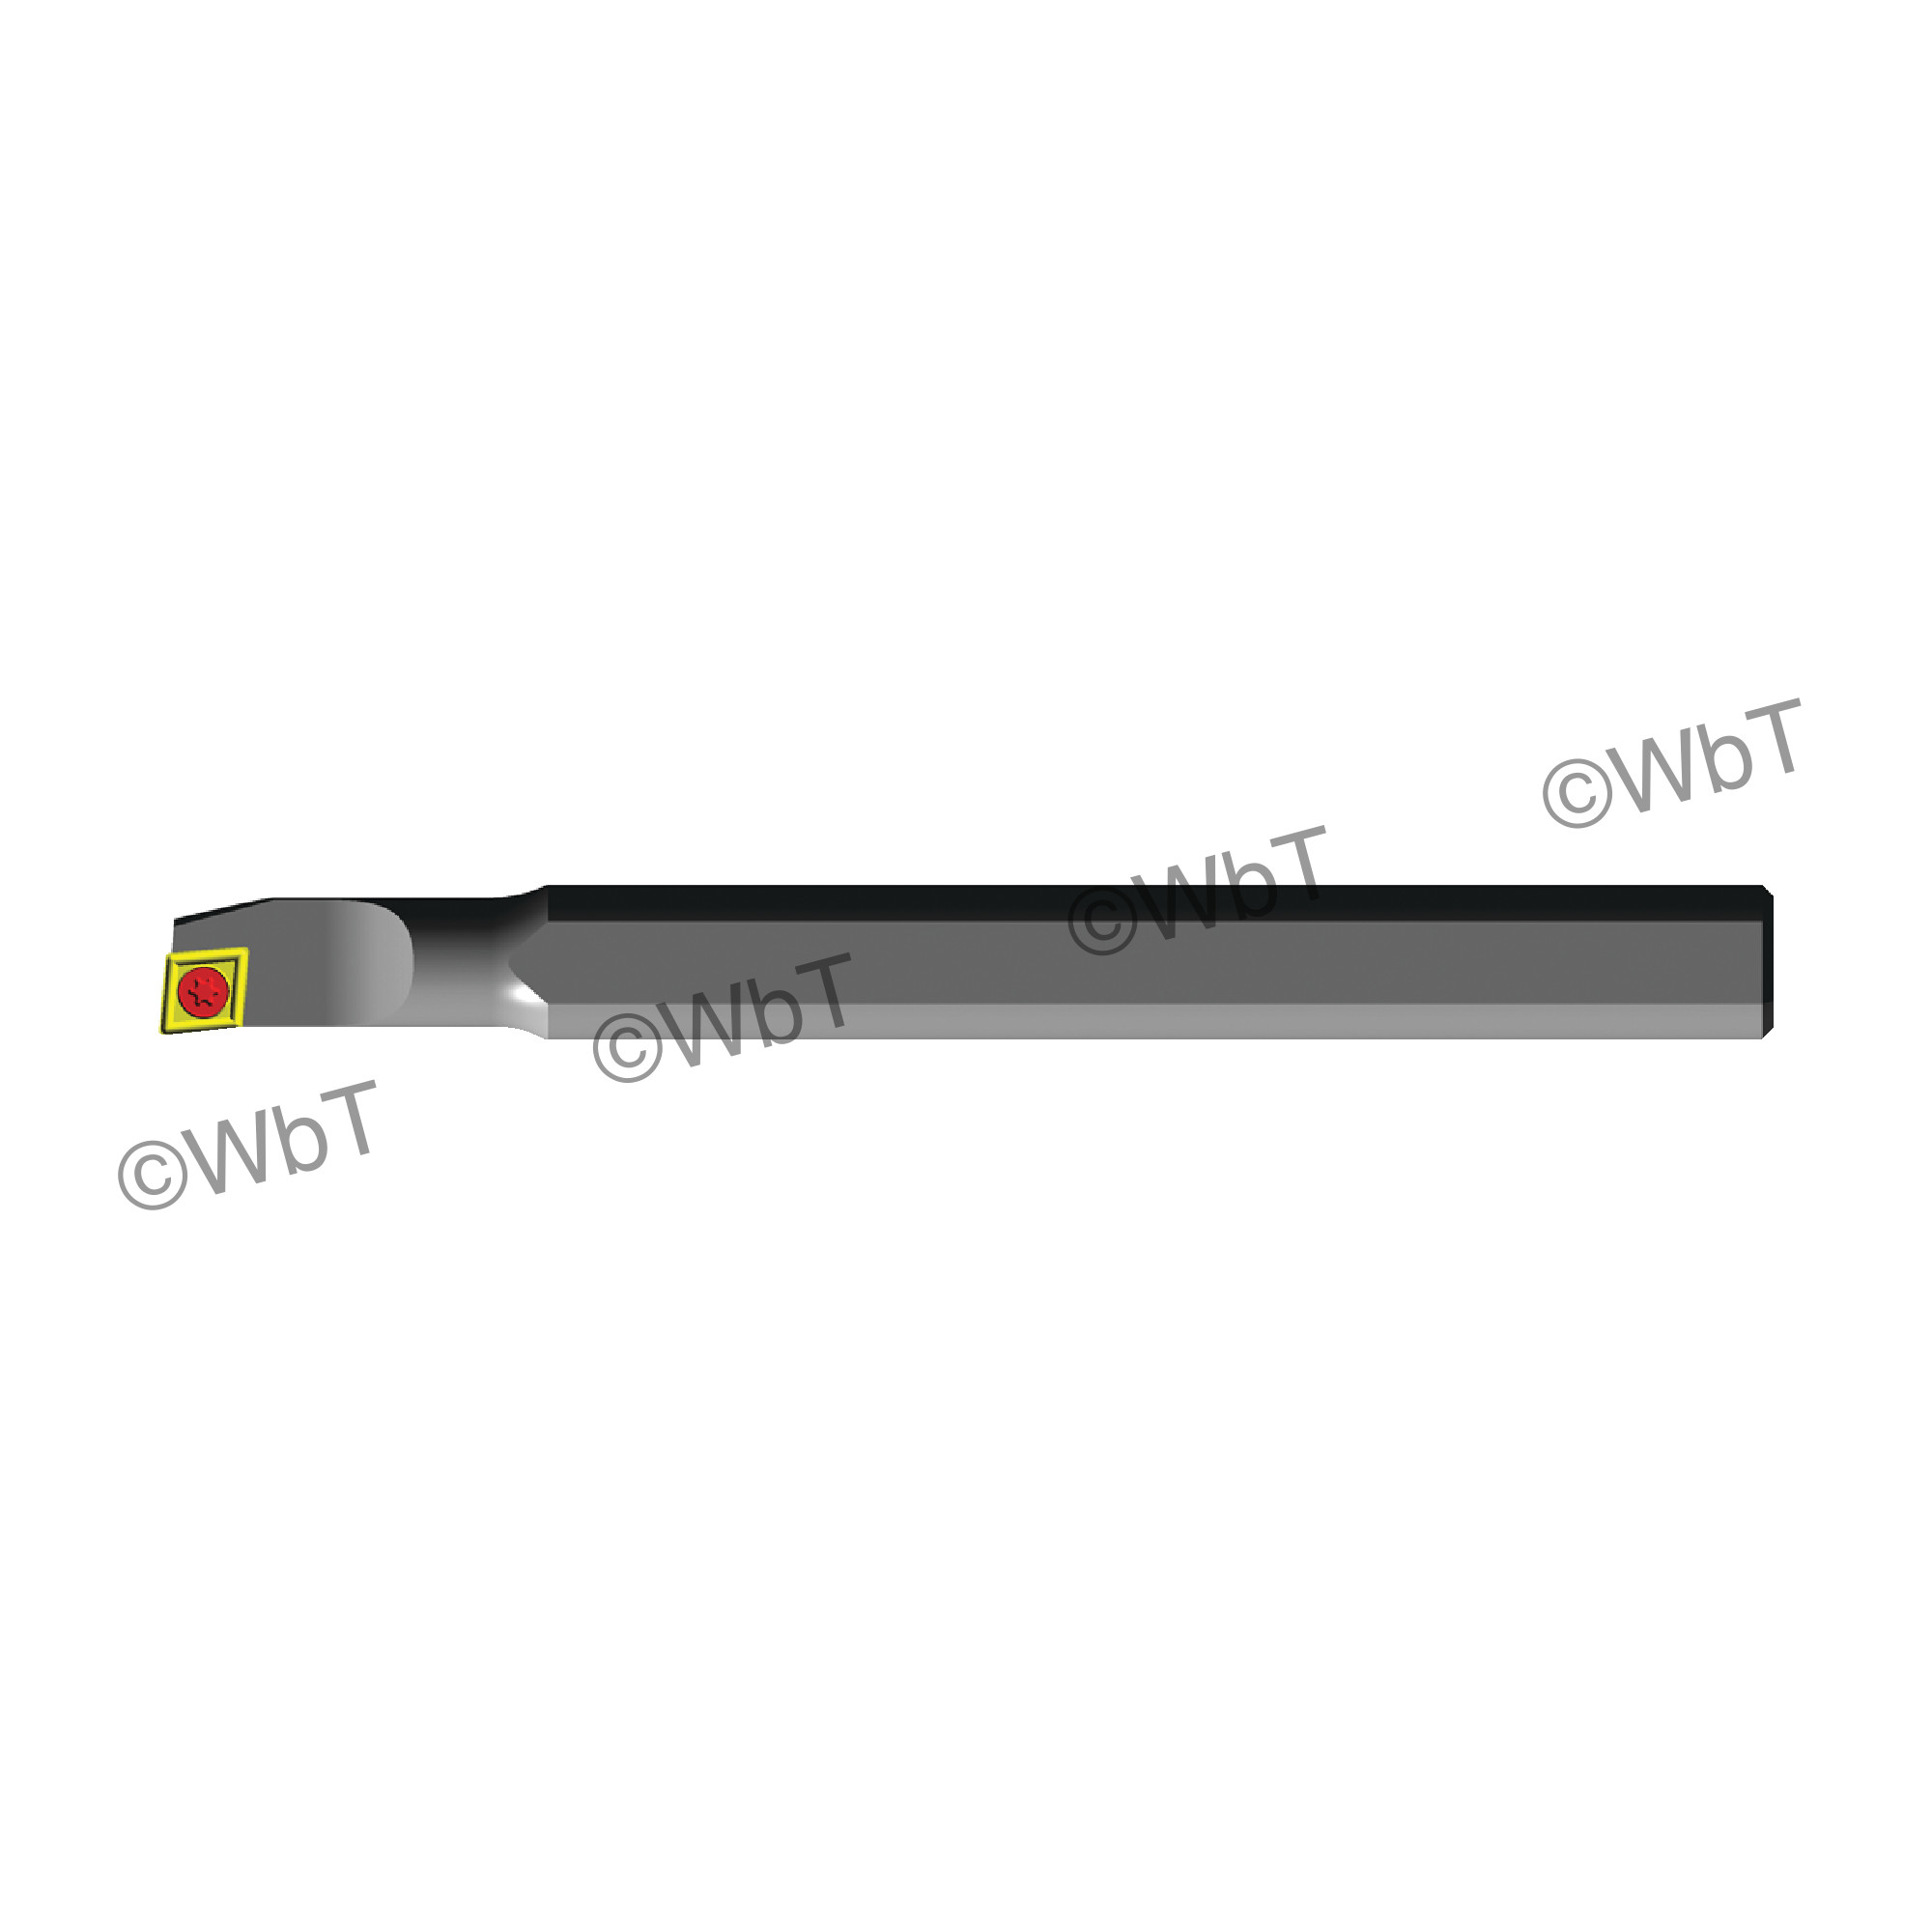 T&O - S05H-SCXCR-2 / Steel Boring Bar / 0.3125" Shank / CCMT2(1.5)_ / Right Hand